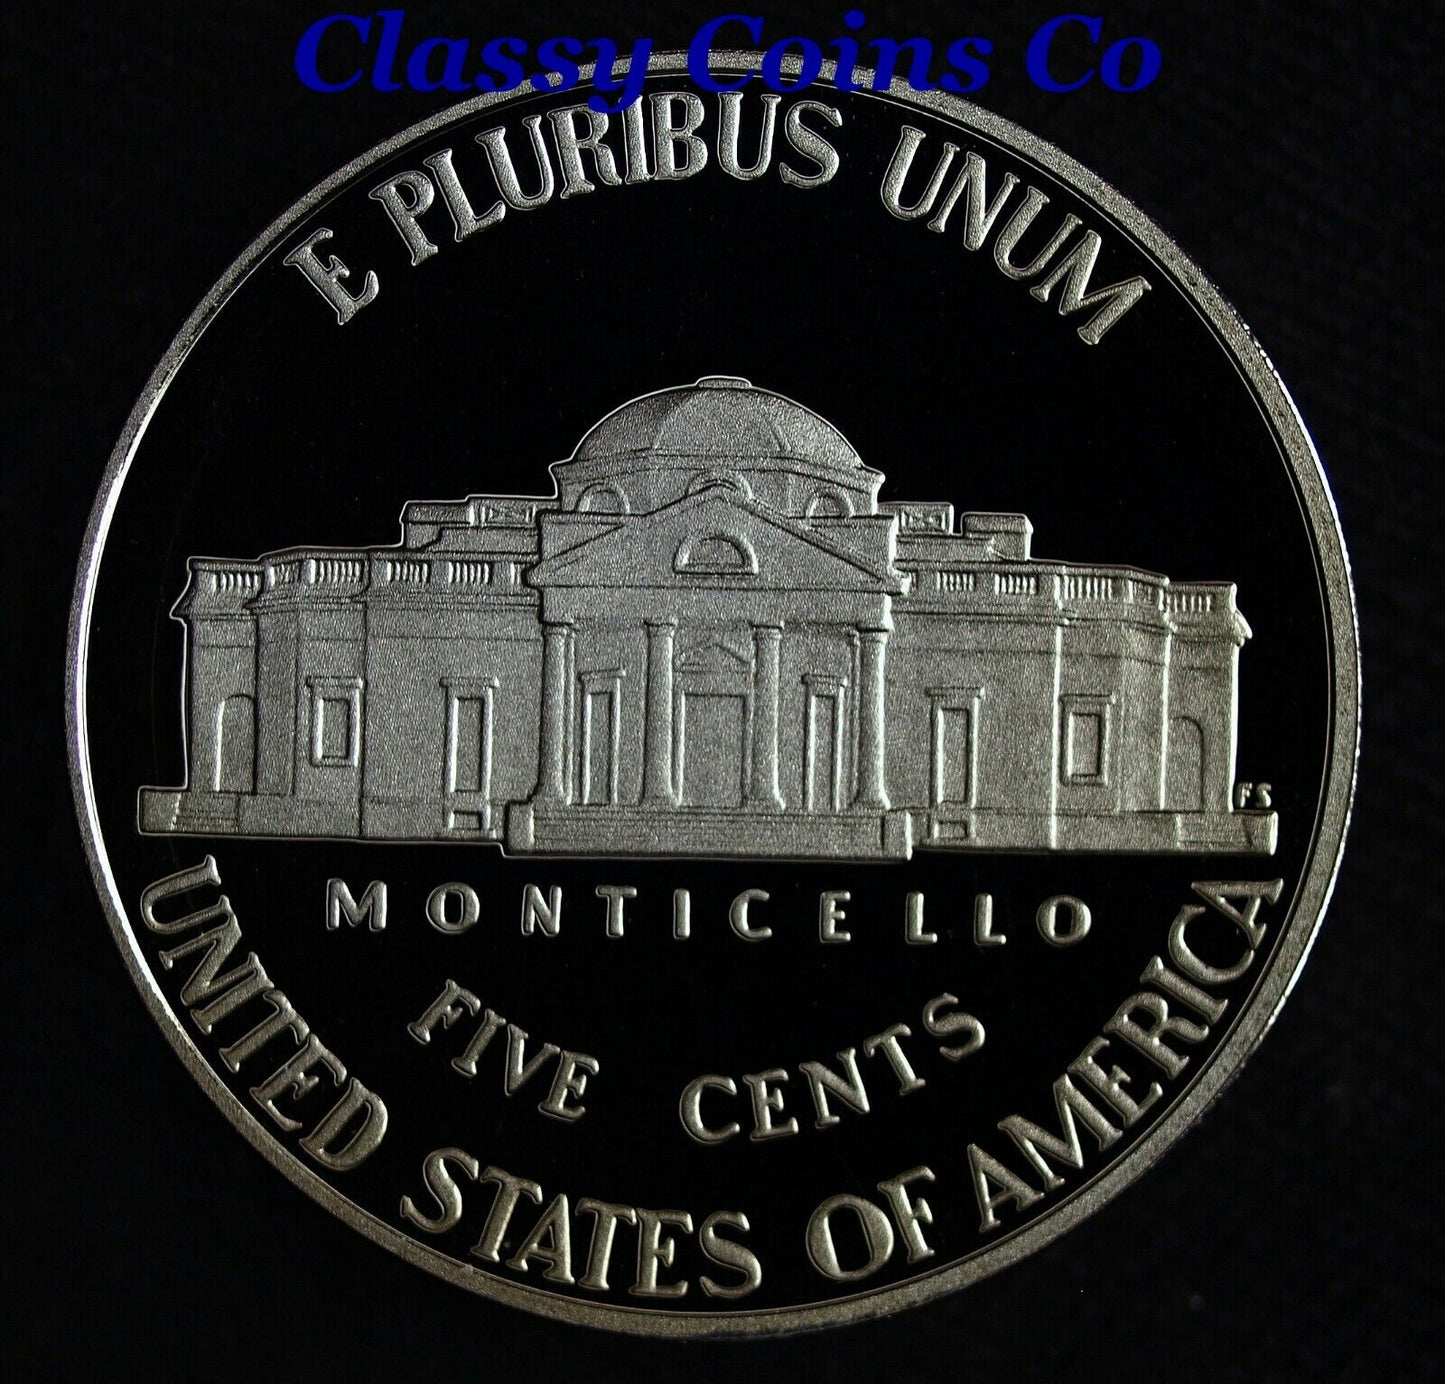 2012 S Proof Jefferson Nickel ☆☆Ultra Cameo ☆☆ Fresh From Proof Set ☆☆ 172